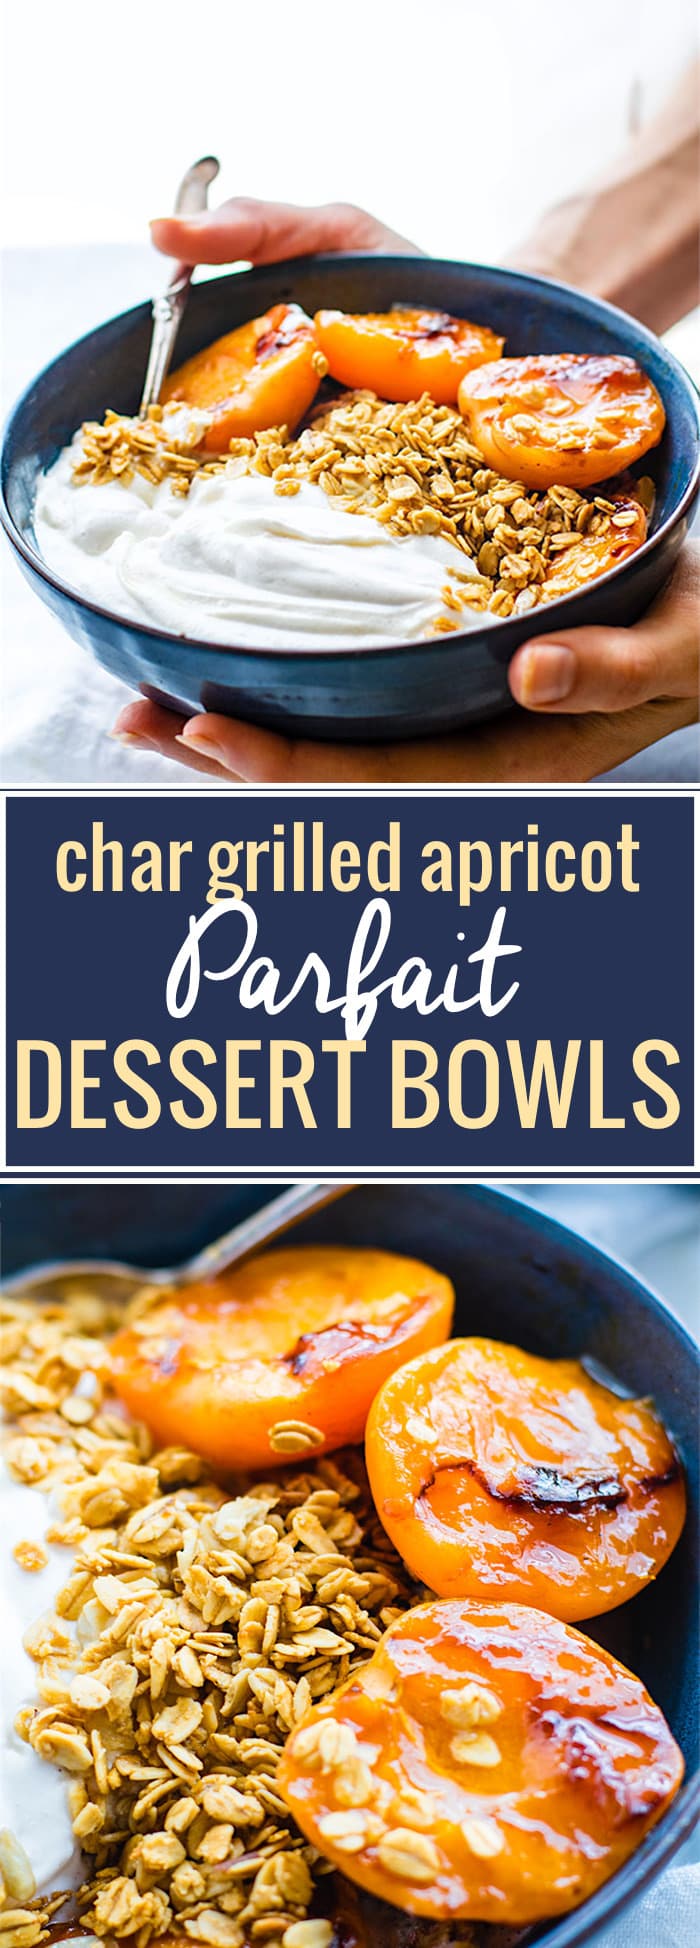 Gluten Free Char-grilled apricot parfait dessert bowls! These dessert bowls are great for dessert or breakfast. A light and simple dessert that's layered across with glazed grilled apricots, whipped coconut cream, and wholesome granola. Vegan Friendly. @cottercrunch